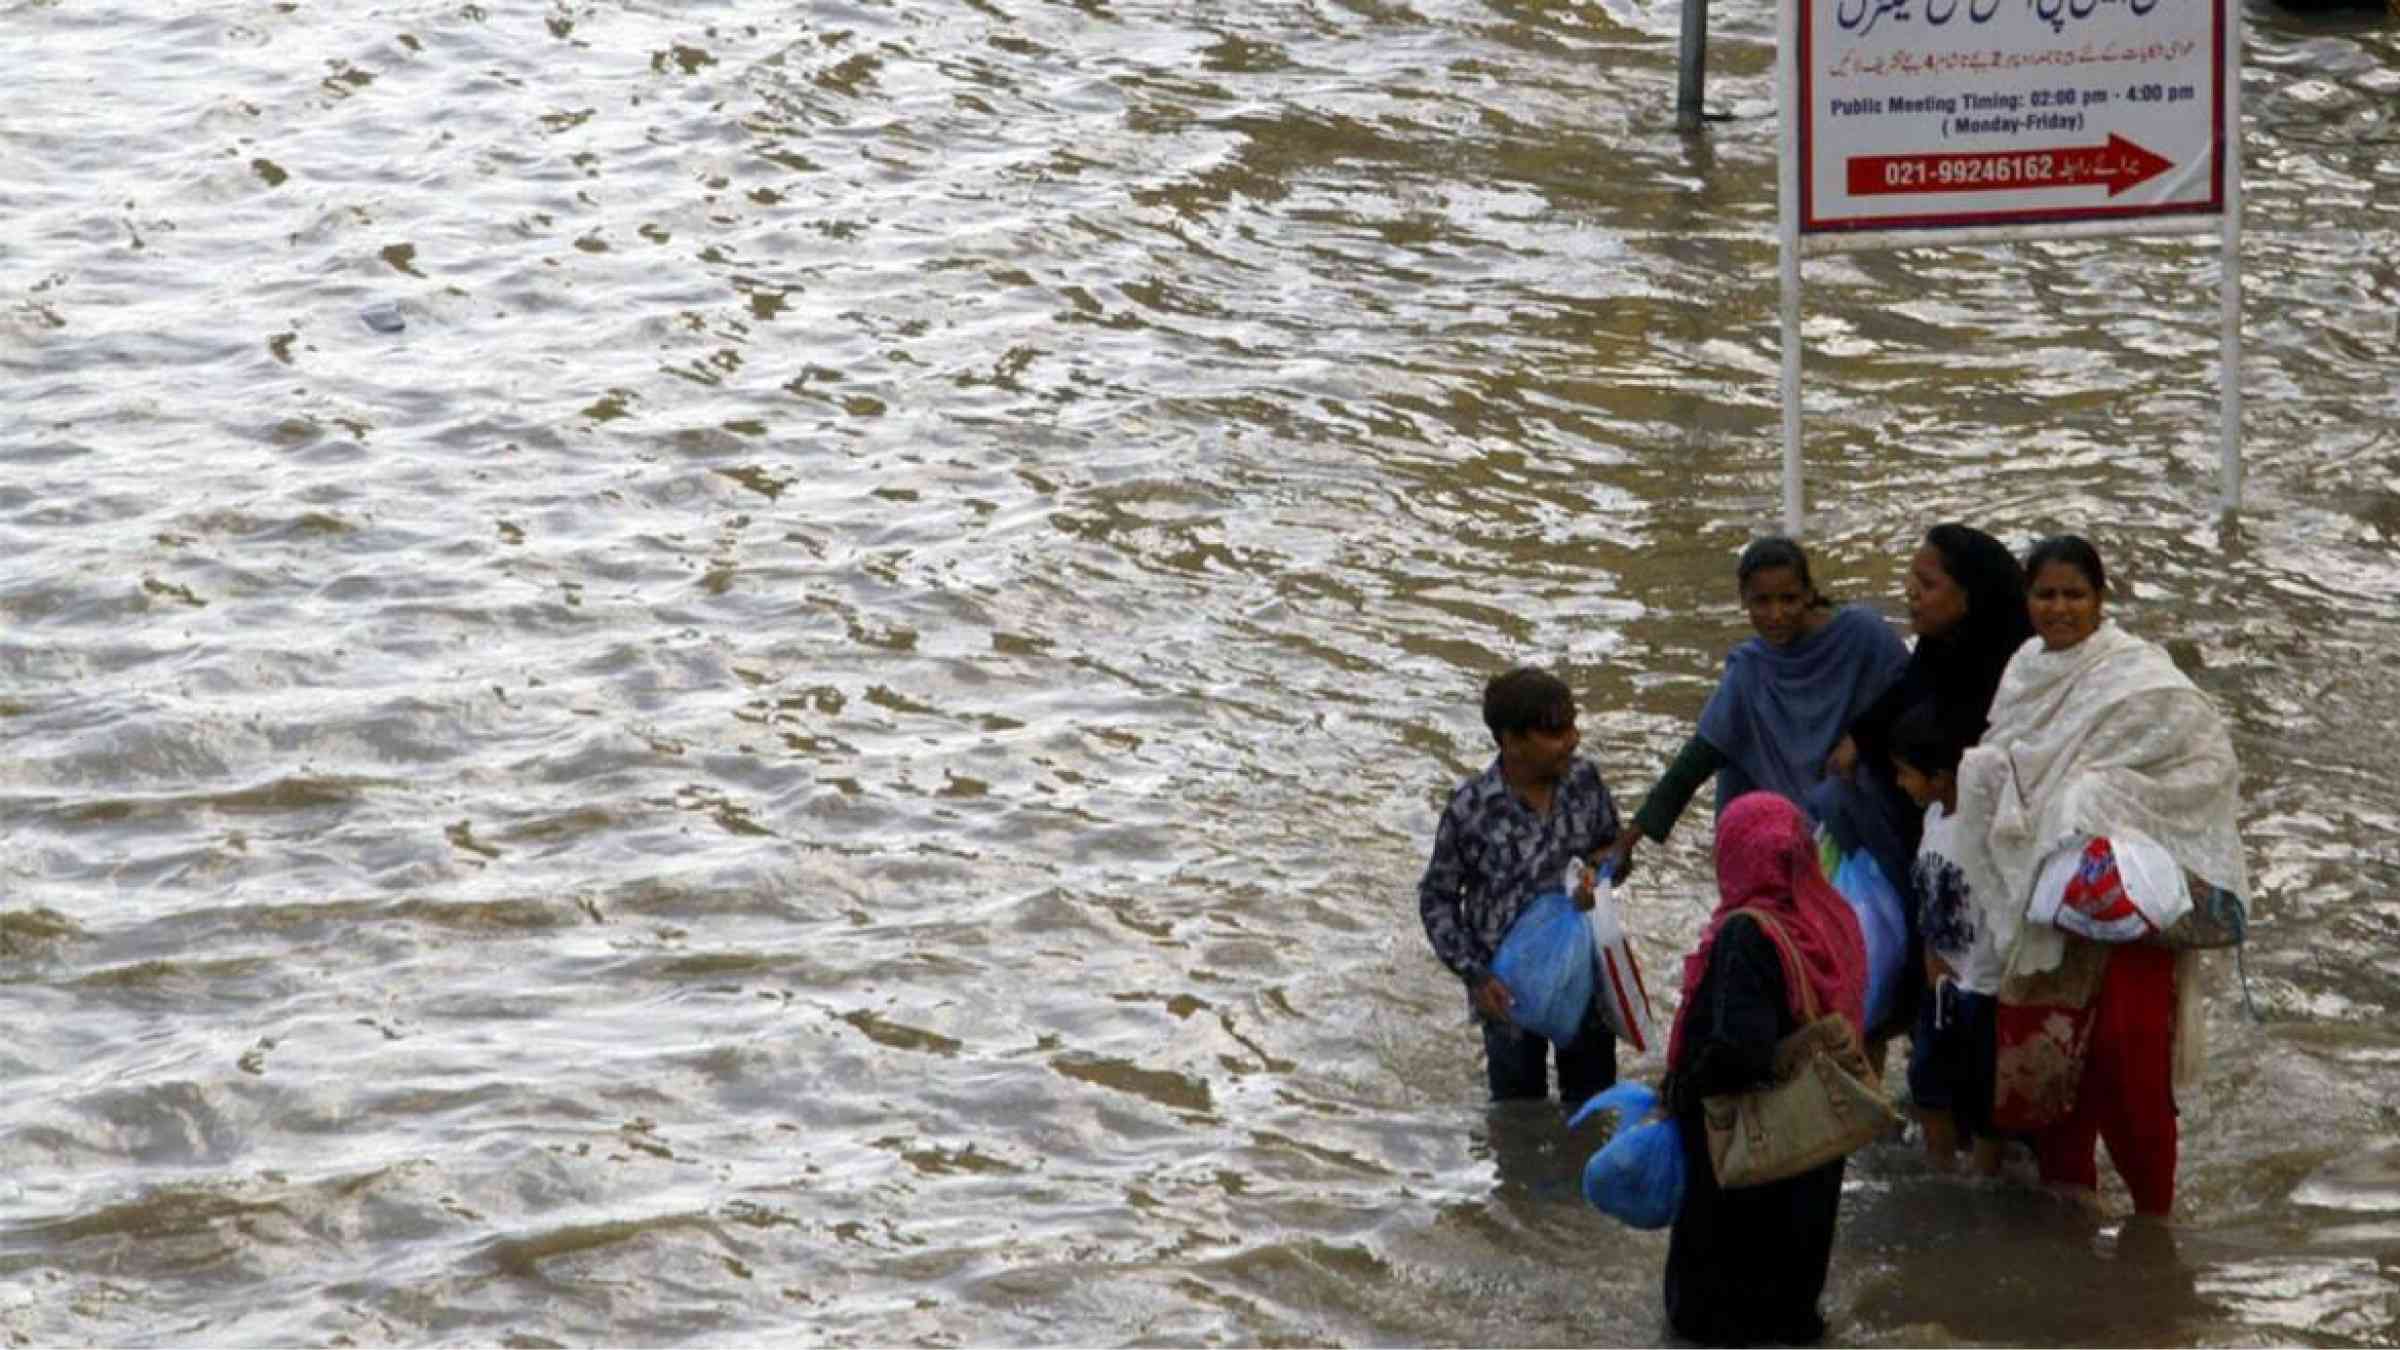 A group of pedestrians are stranded during heavy flooding in Karachi, Pakistan